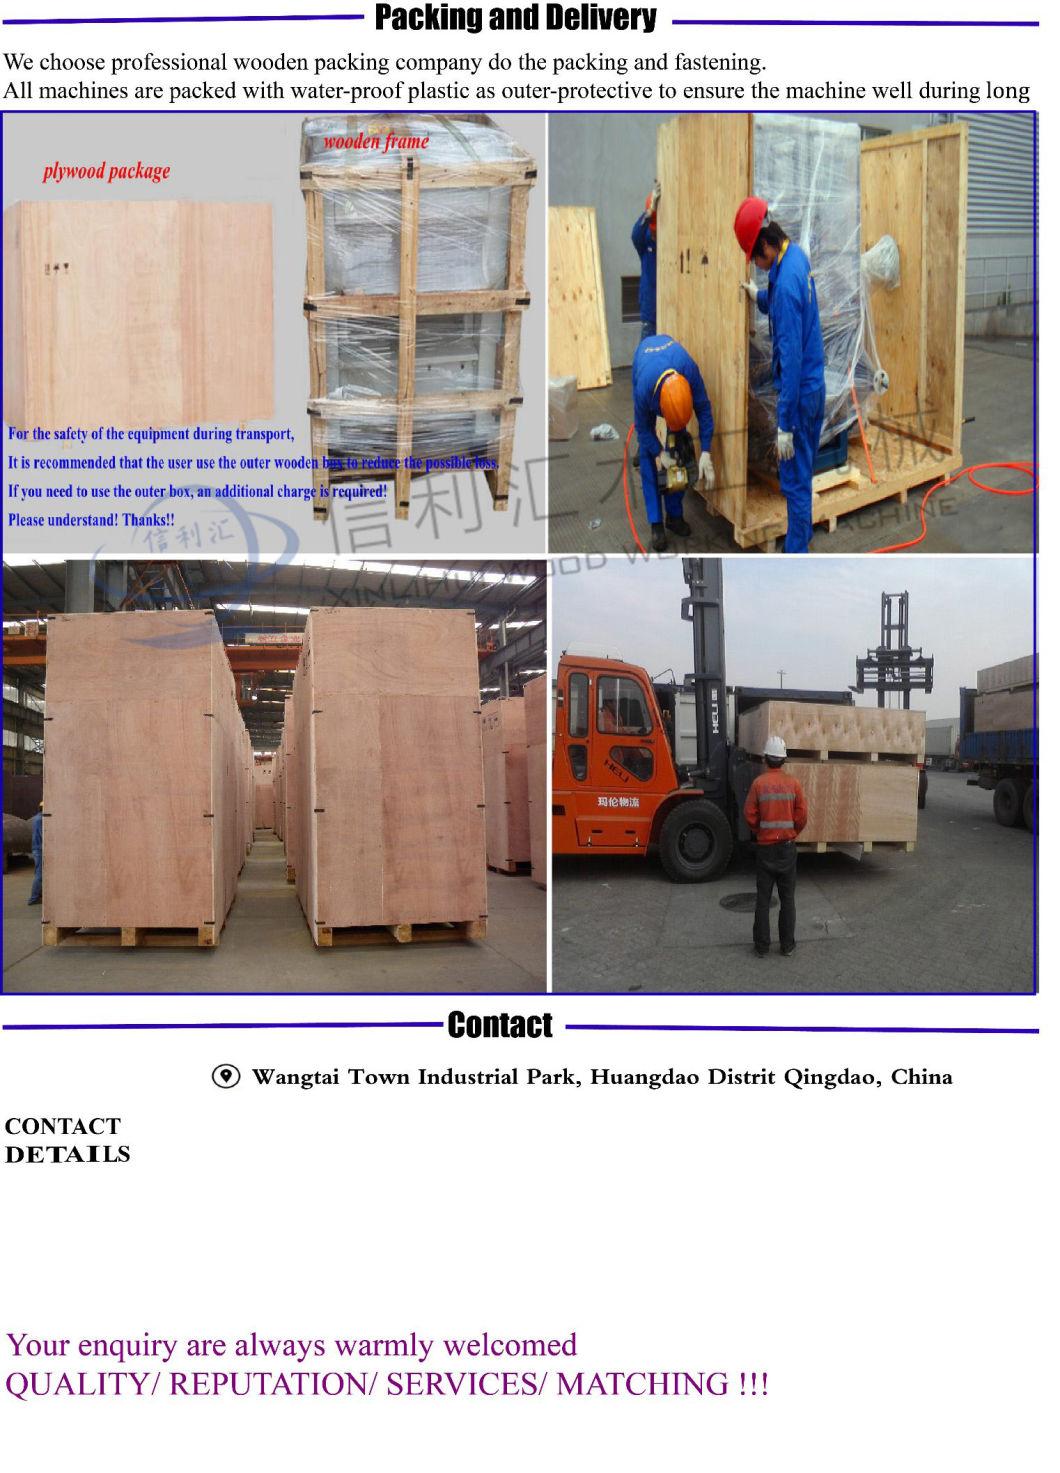 Woodworking Machinery Four-Sided Planing Four-Axis Five-Axis Four-Sided Planing Woodworking Six-Axis Four-Sided Planing